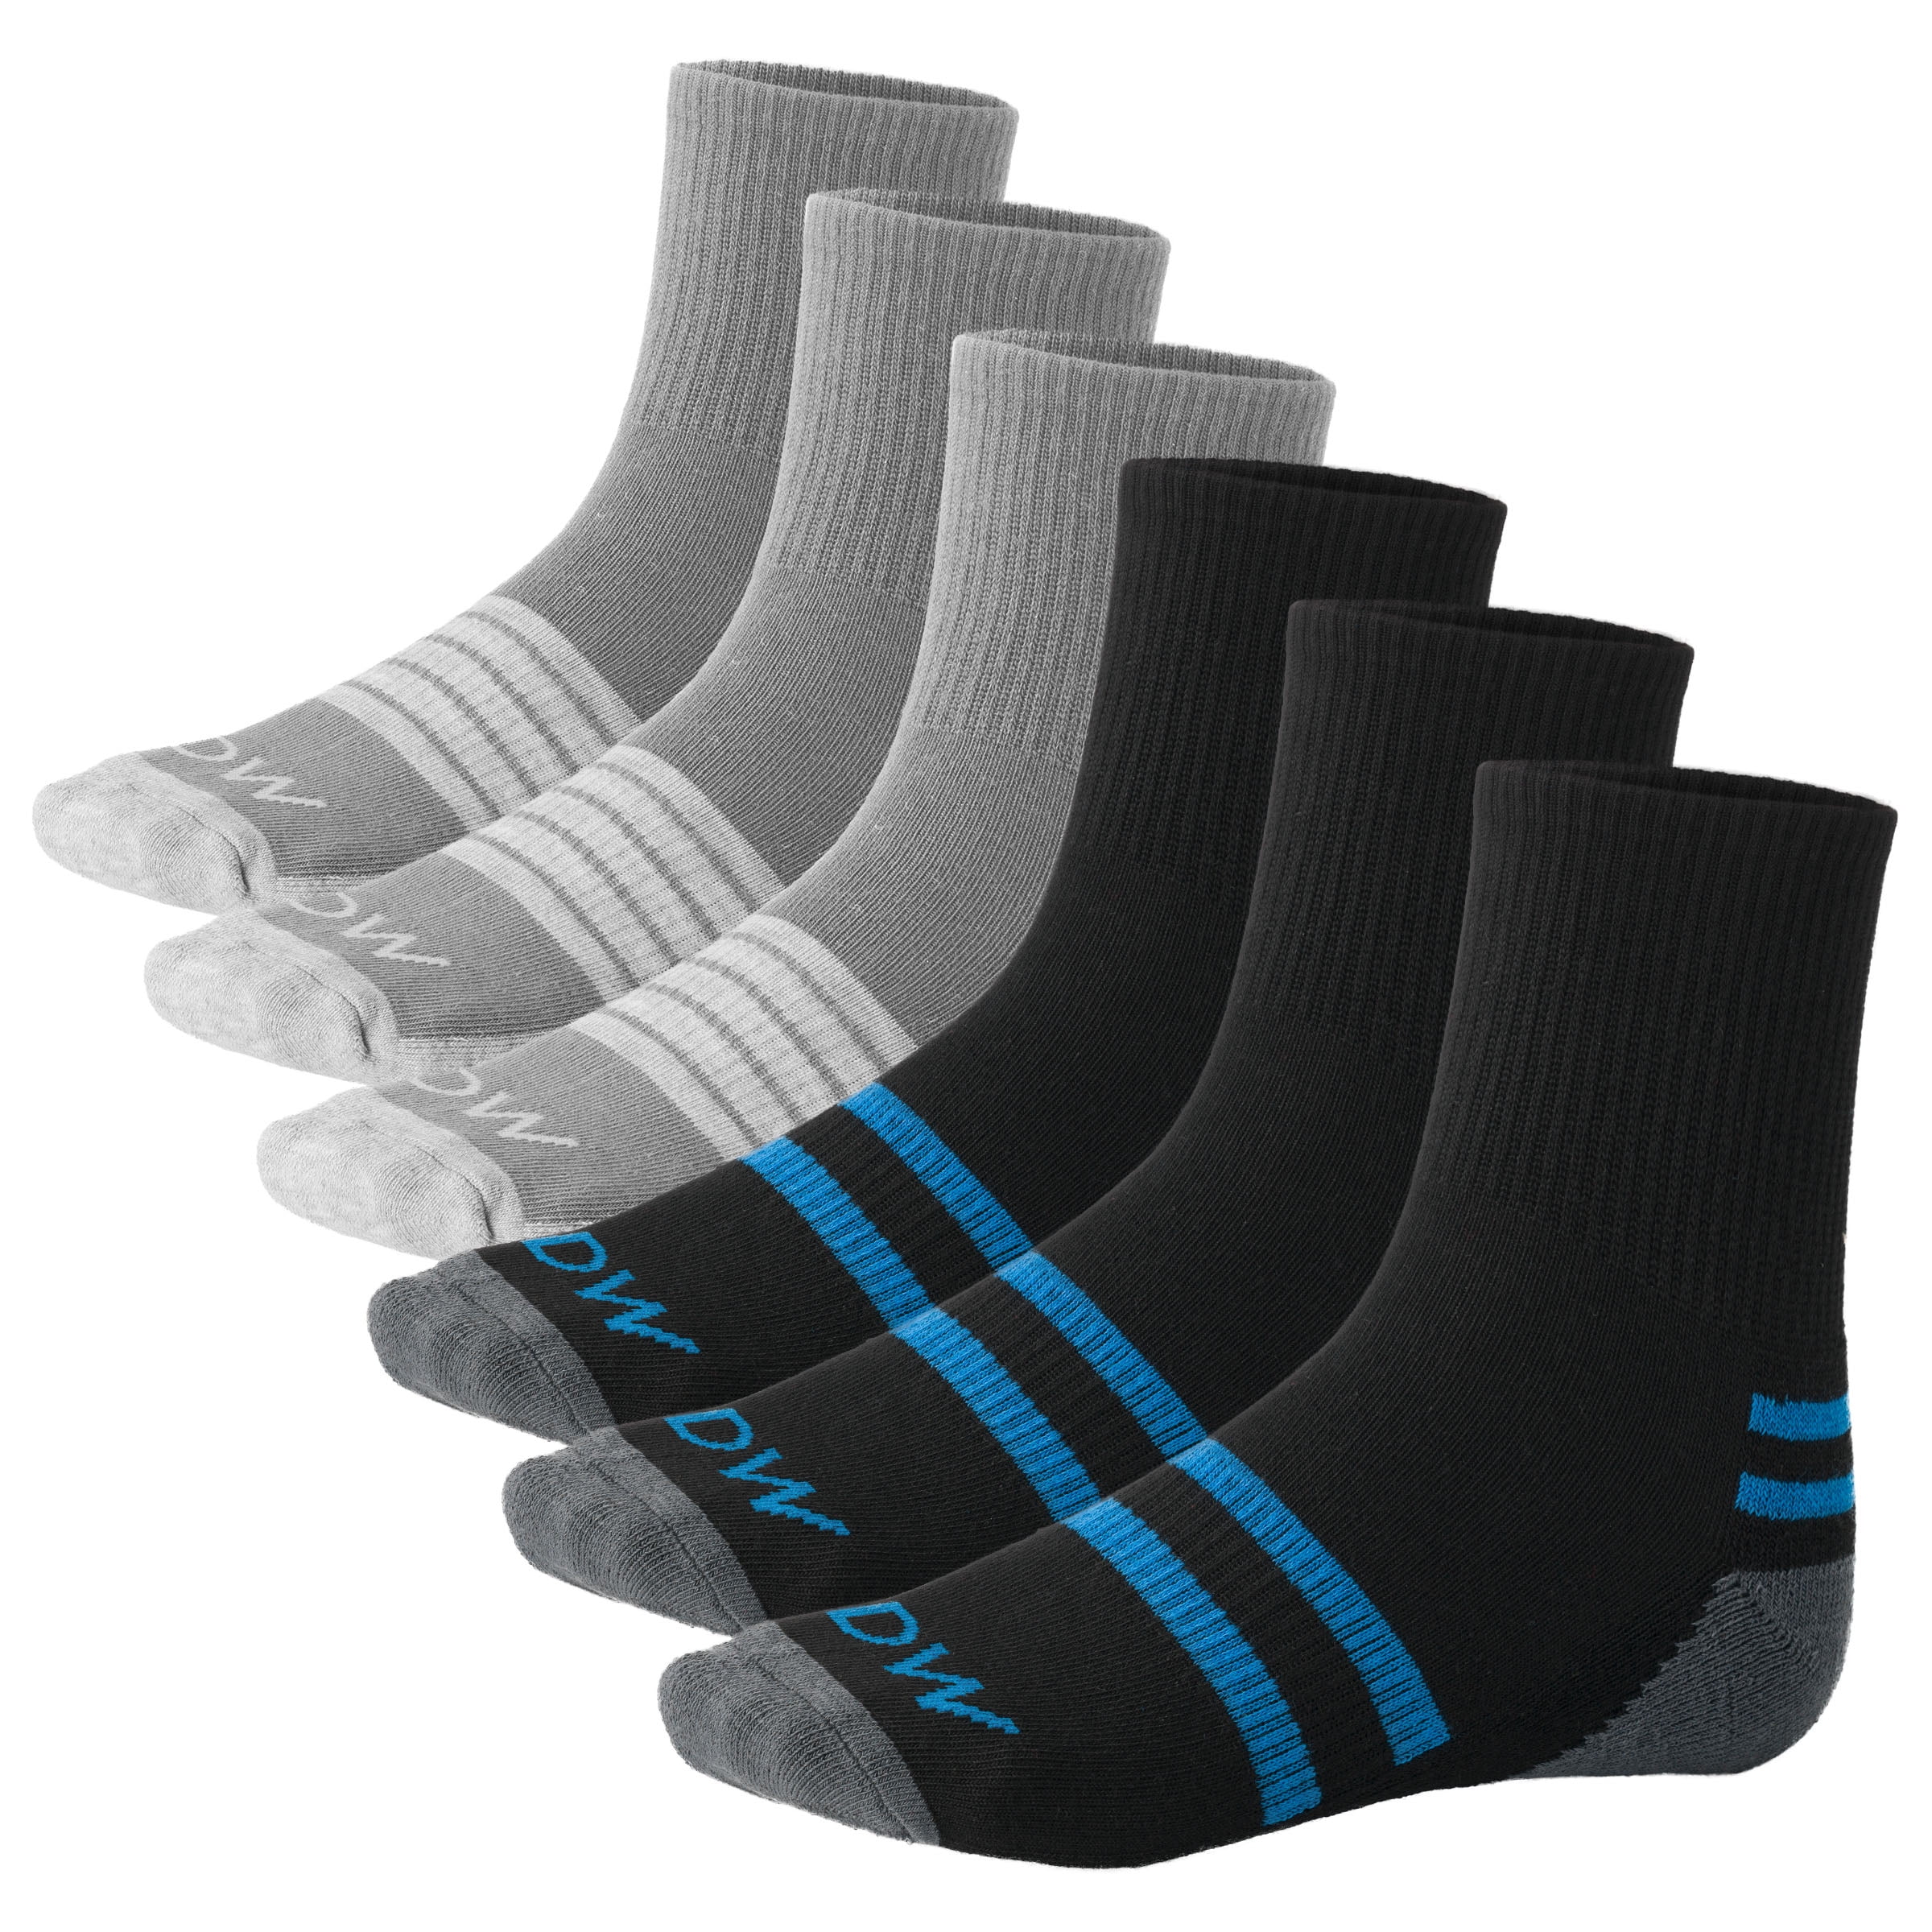 Details about   1pair Unisex Cycling Fitness Sporting Breathable Socks Mid-stocking Socks 